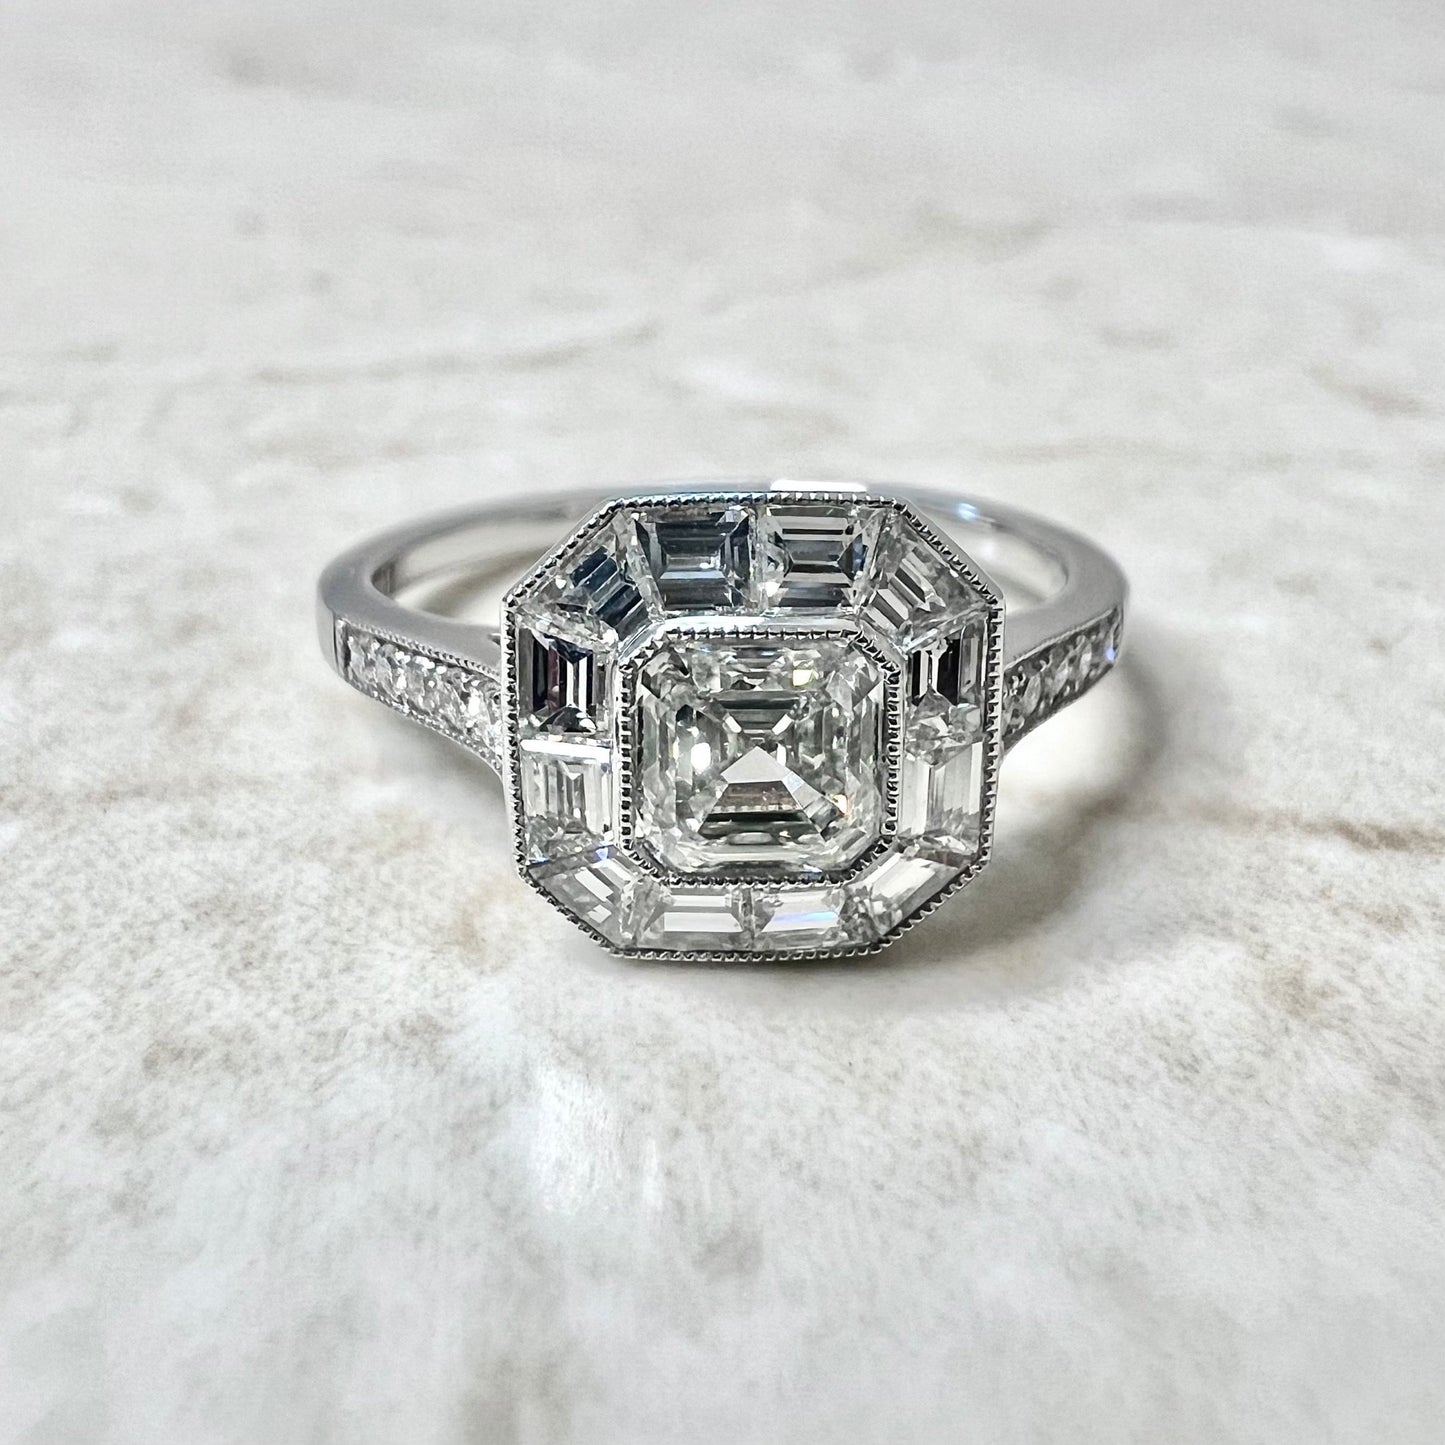 Fine Handcrafted Platinum Art Deco Style Diamond Halo Ring - Asscher Cut Diamond Halo Engagement Ring - Promise Ring - Vintage Style Ring